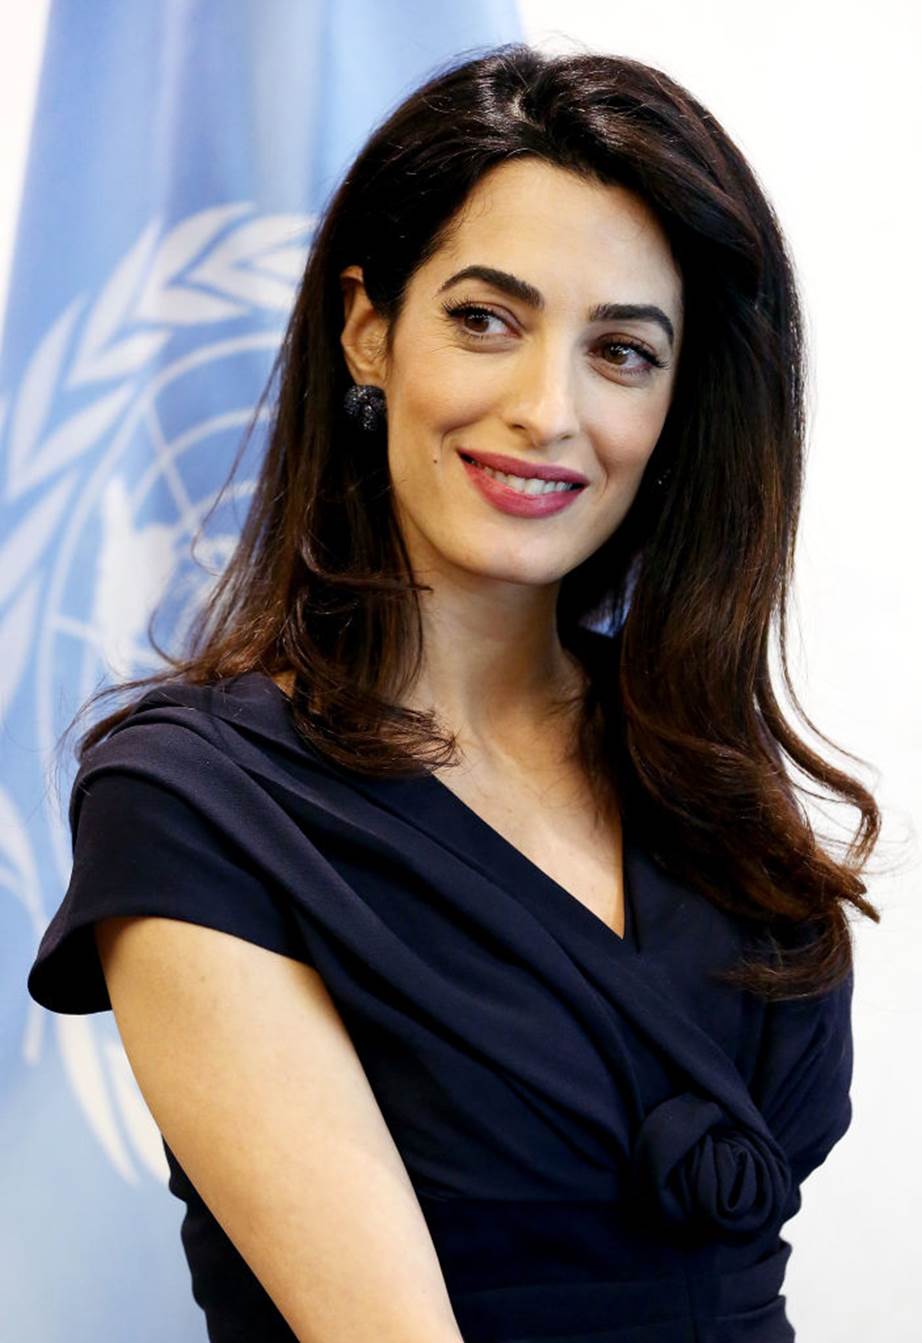 Amal Clooney pictured in March 2017 at the United Nations.